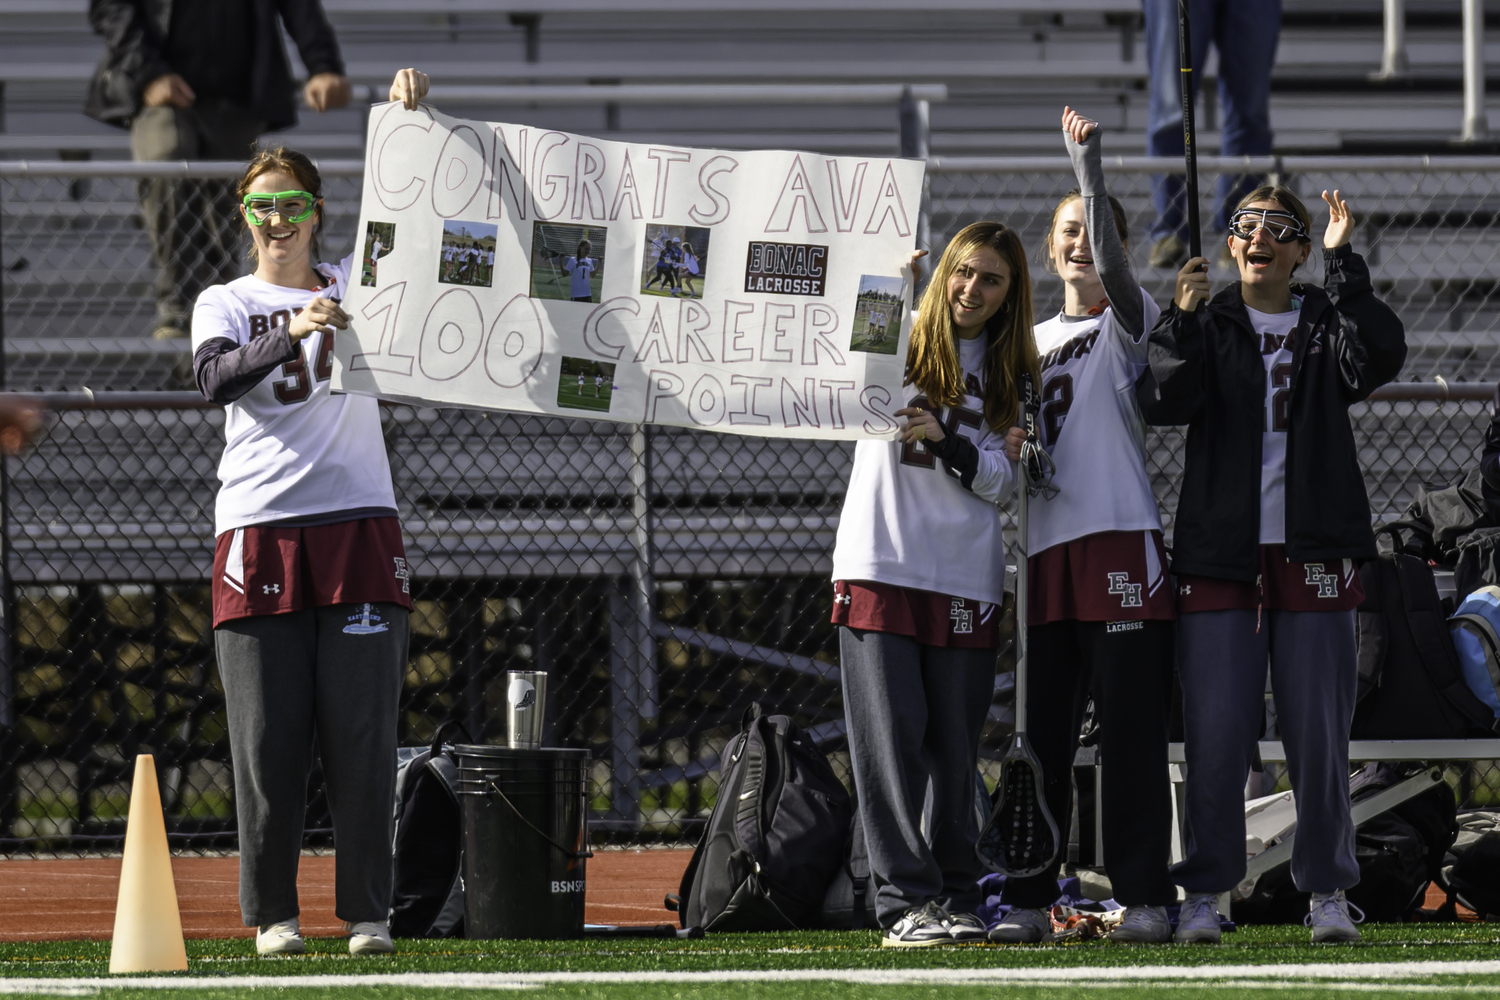 Ruby Tyrell, left, and fellow teammates hold up a sign marking Ava Tintle's career 100th point that she recorded in last week's victory over Southampton.  MARIANNE BARNETT